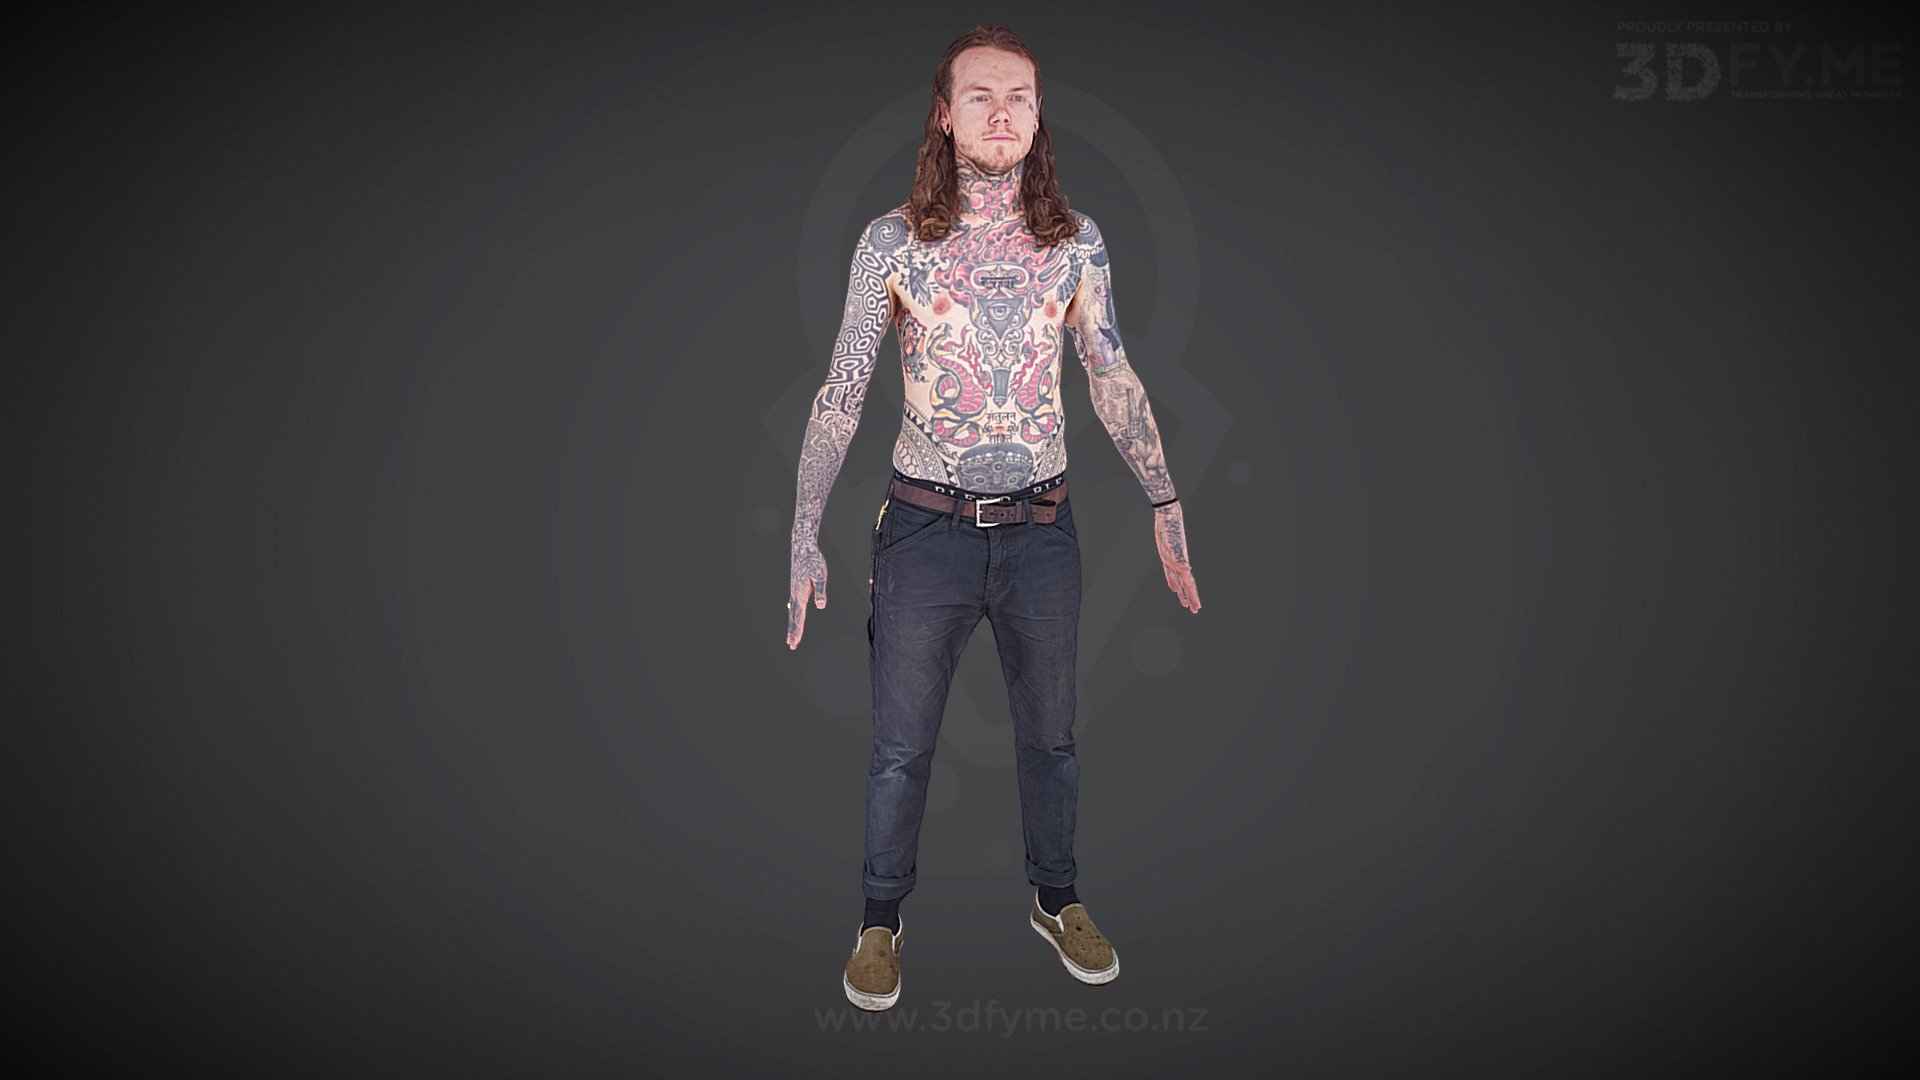 Photogrammetry raw scan, 140 pics (8 MP), decimated, texture re-projected (raw diffuse map, 8k) - Alex, Wellington Tattoo Convention 2021 - 3D model by 3Dfy.me New Zealand (@smacher2016) 3d model